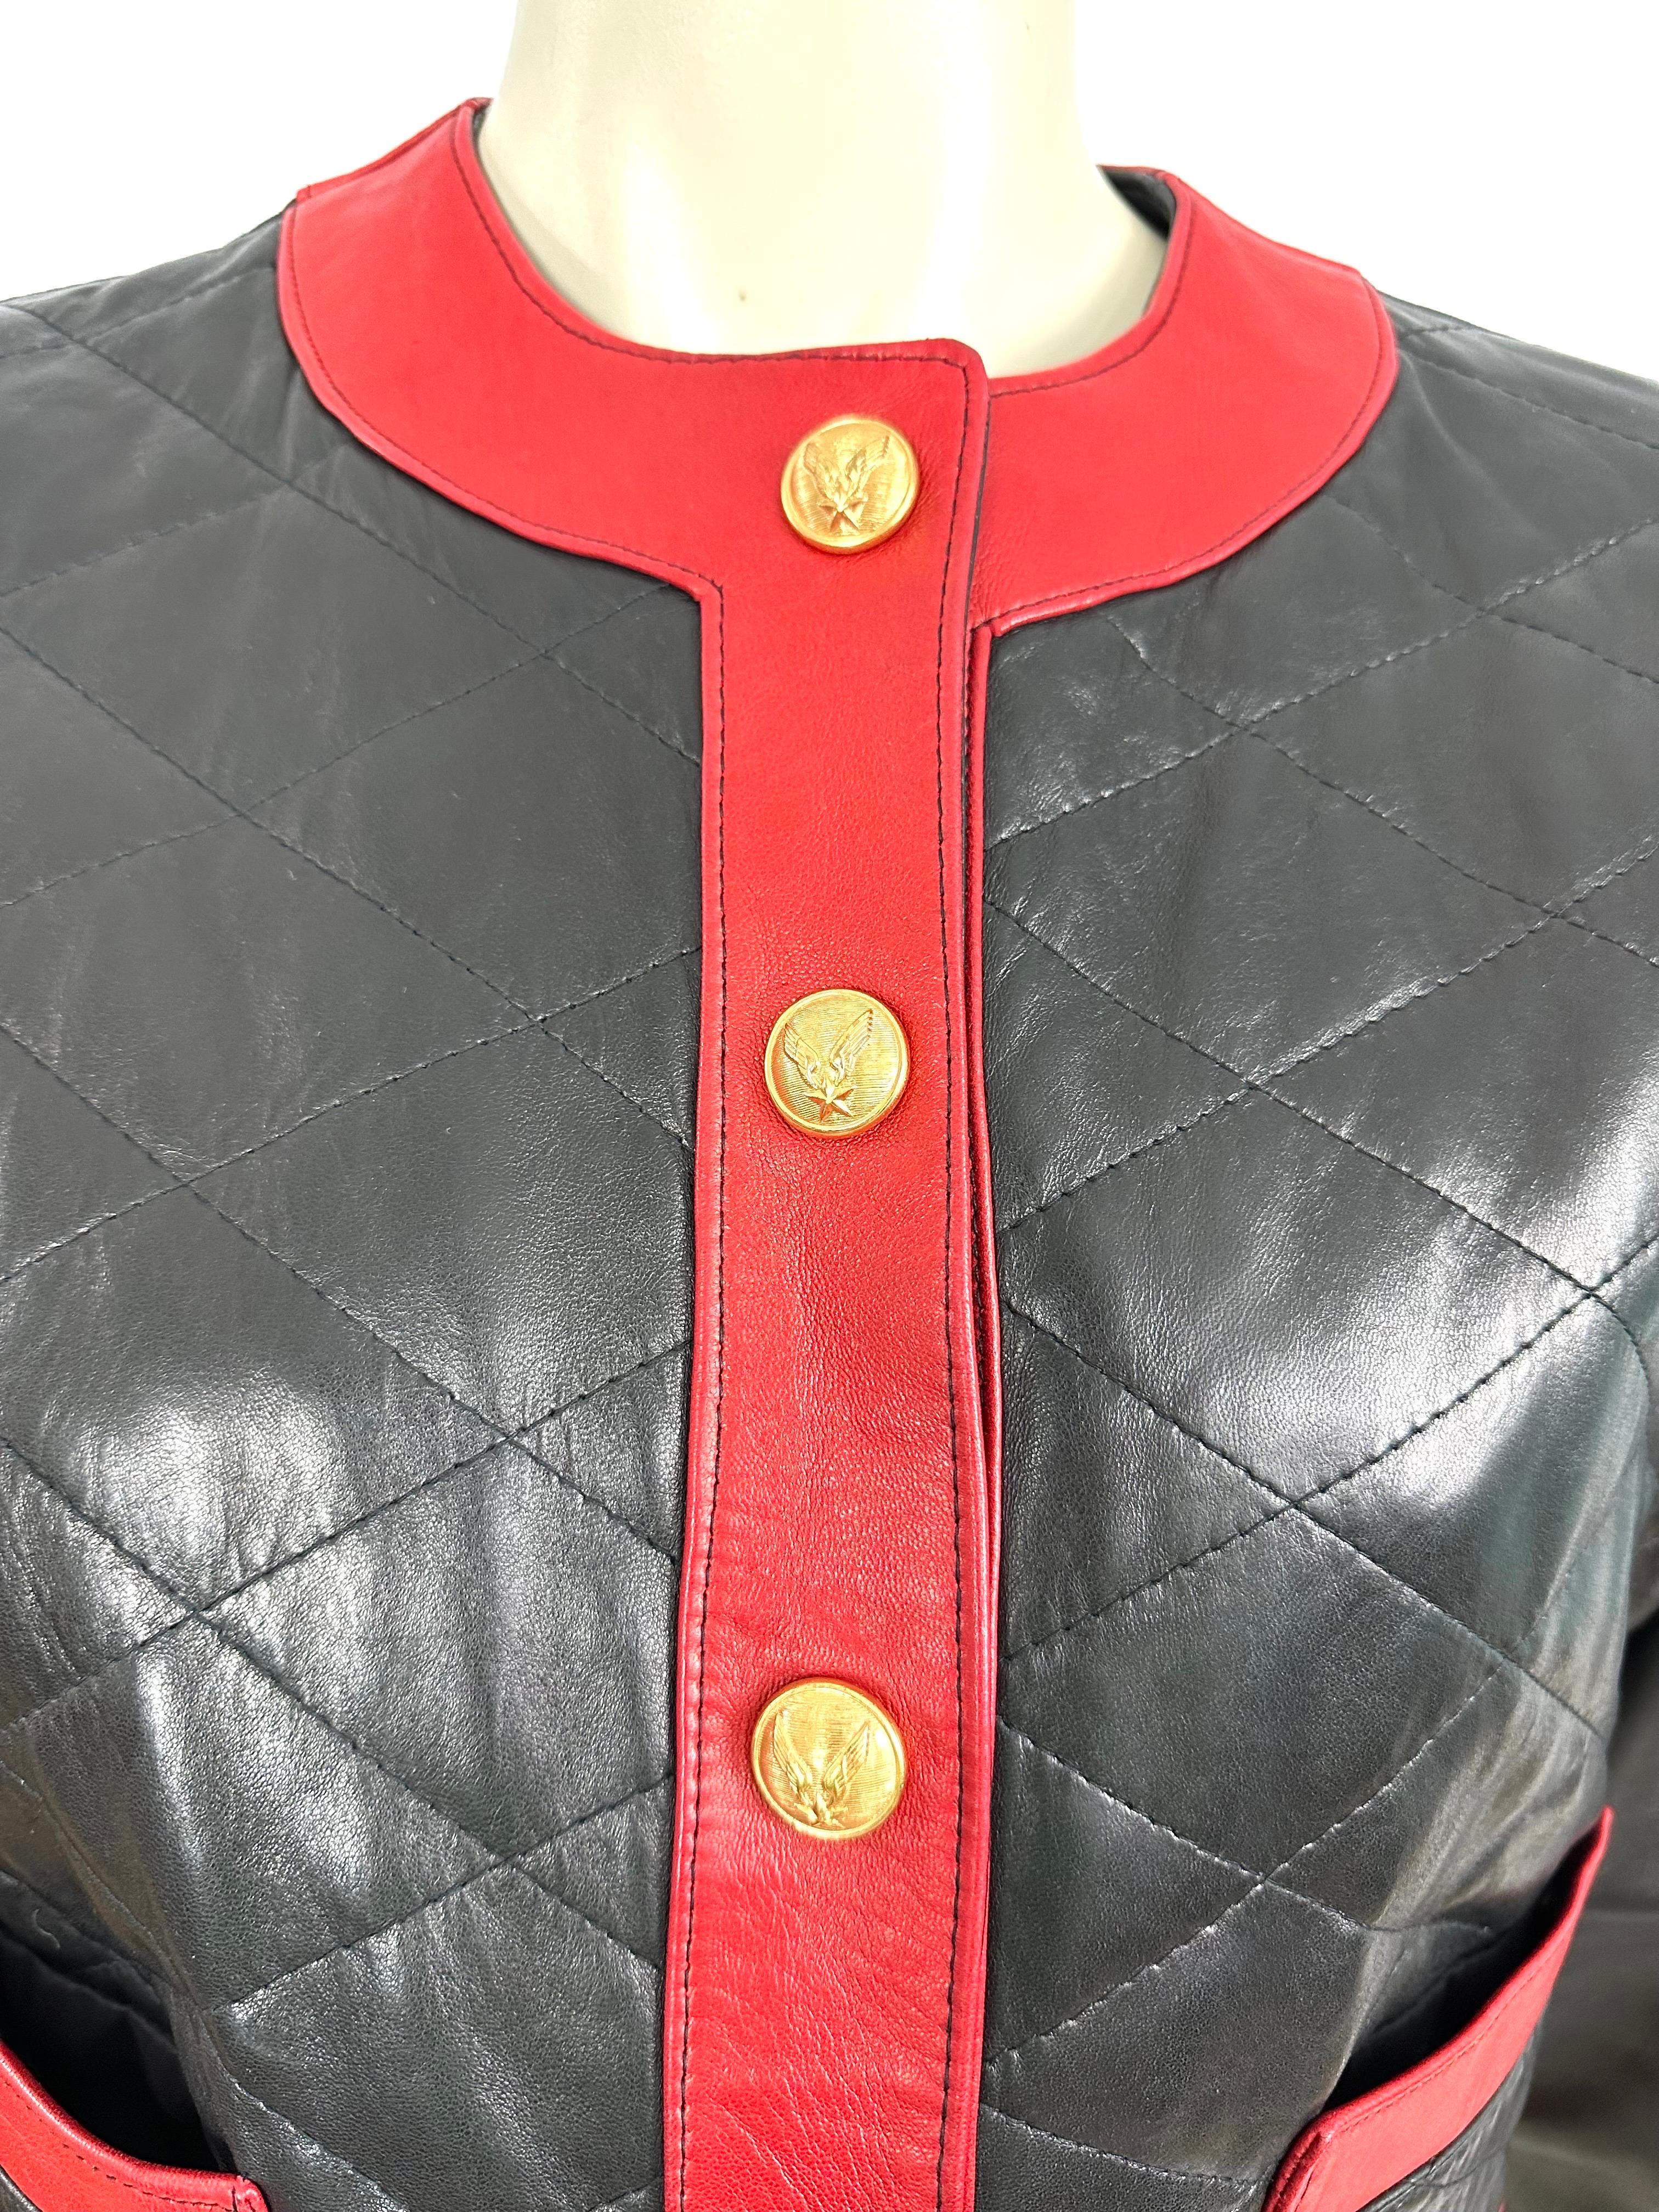 Pellessimo soft lambskin jacket from the 1980s, quilted, black and red with pretty gold metal snaps.
Short cut, round neck, slightly shouldered, 2 small pockets on the bottom of the jacket.
Interior lining in black satin.
Size label missing,